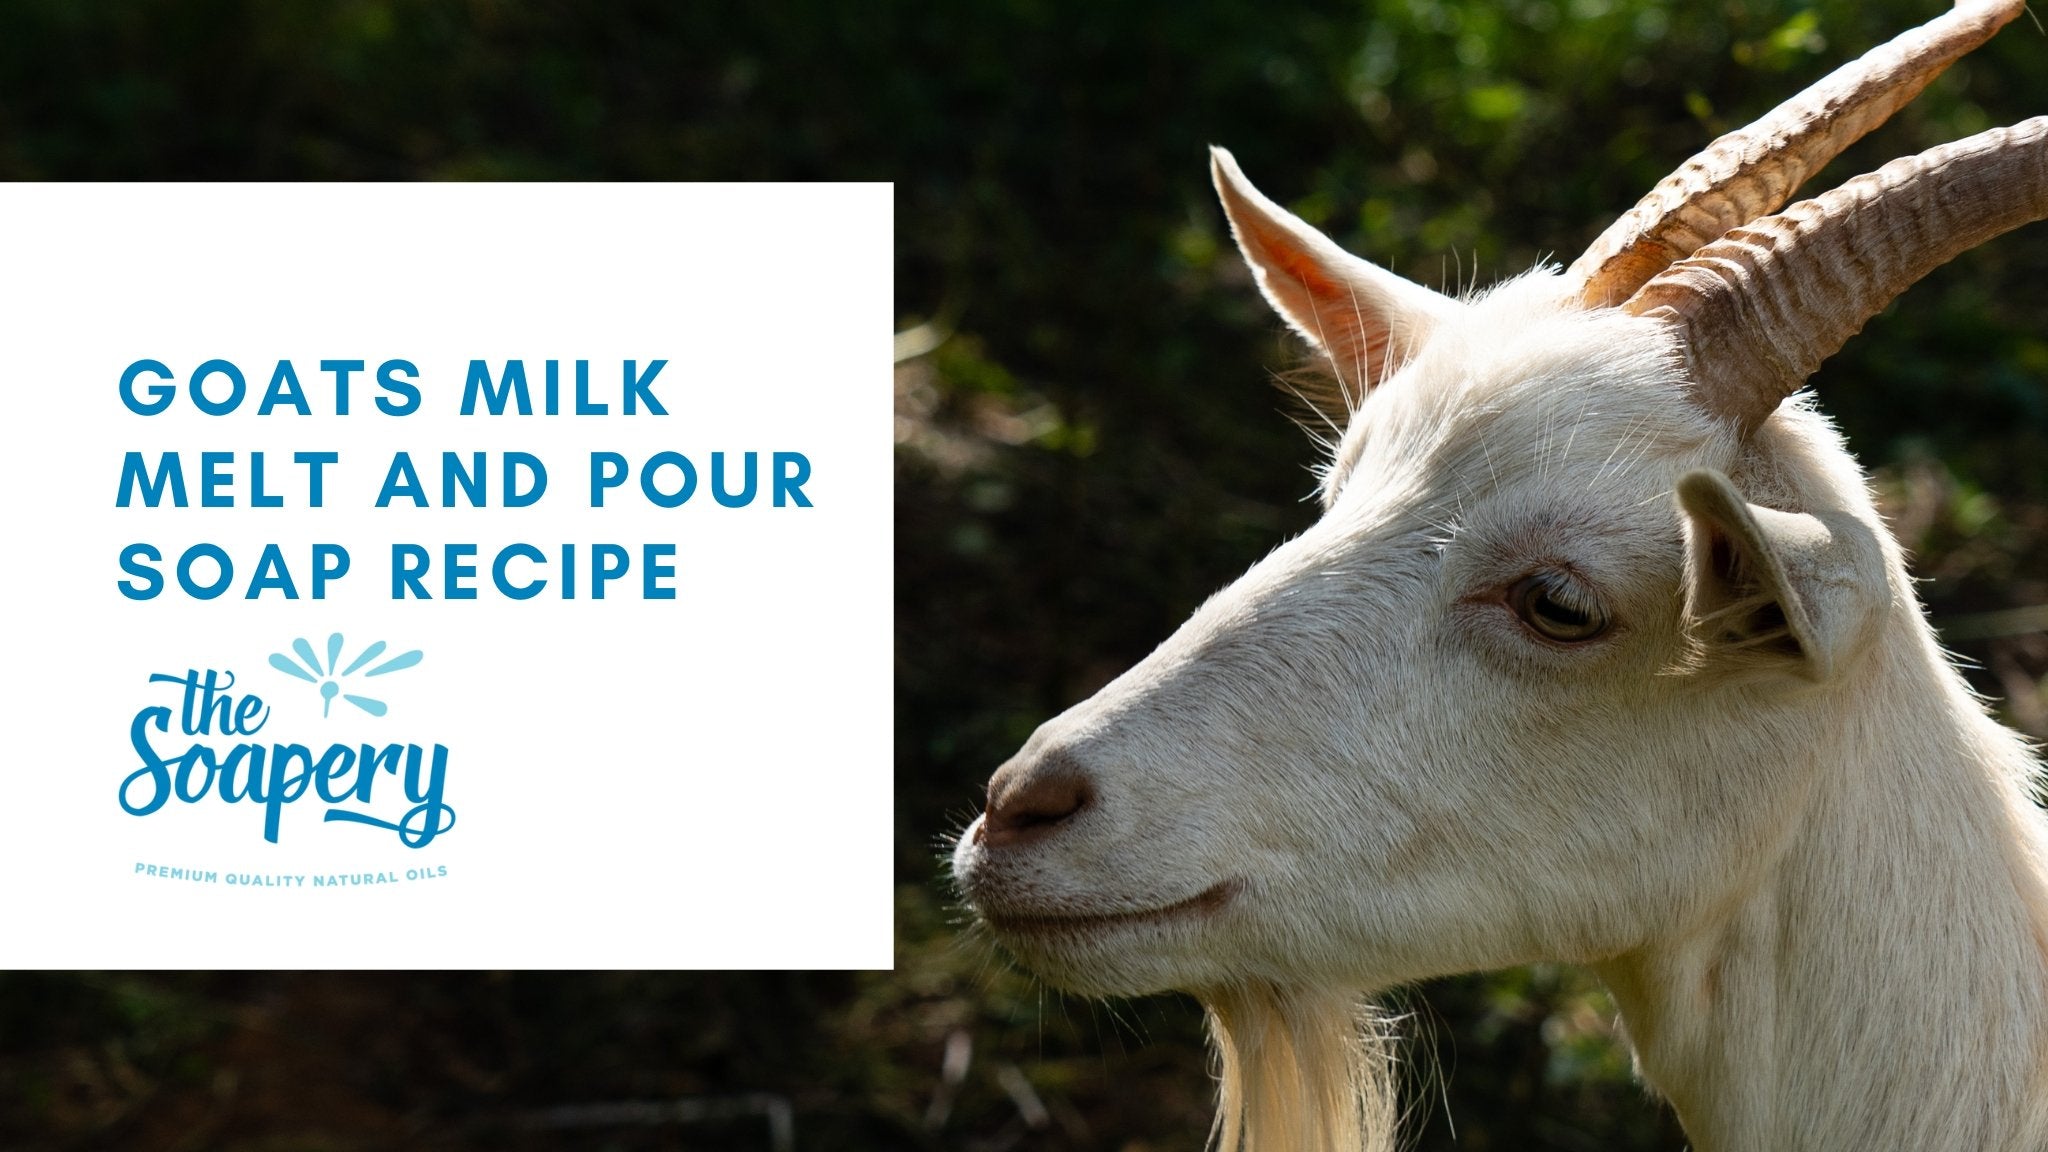 How to Make Homeamde Melt and Pour Goat's Milk Soap